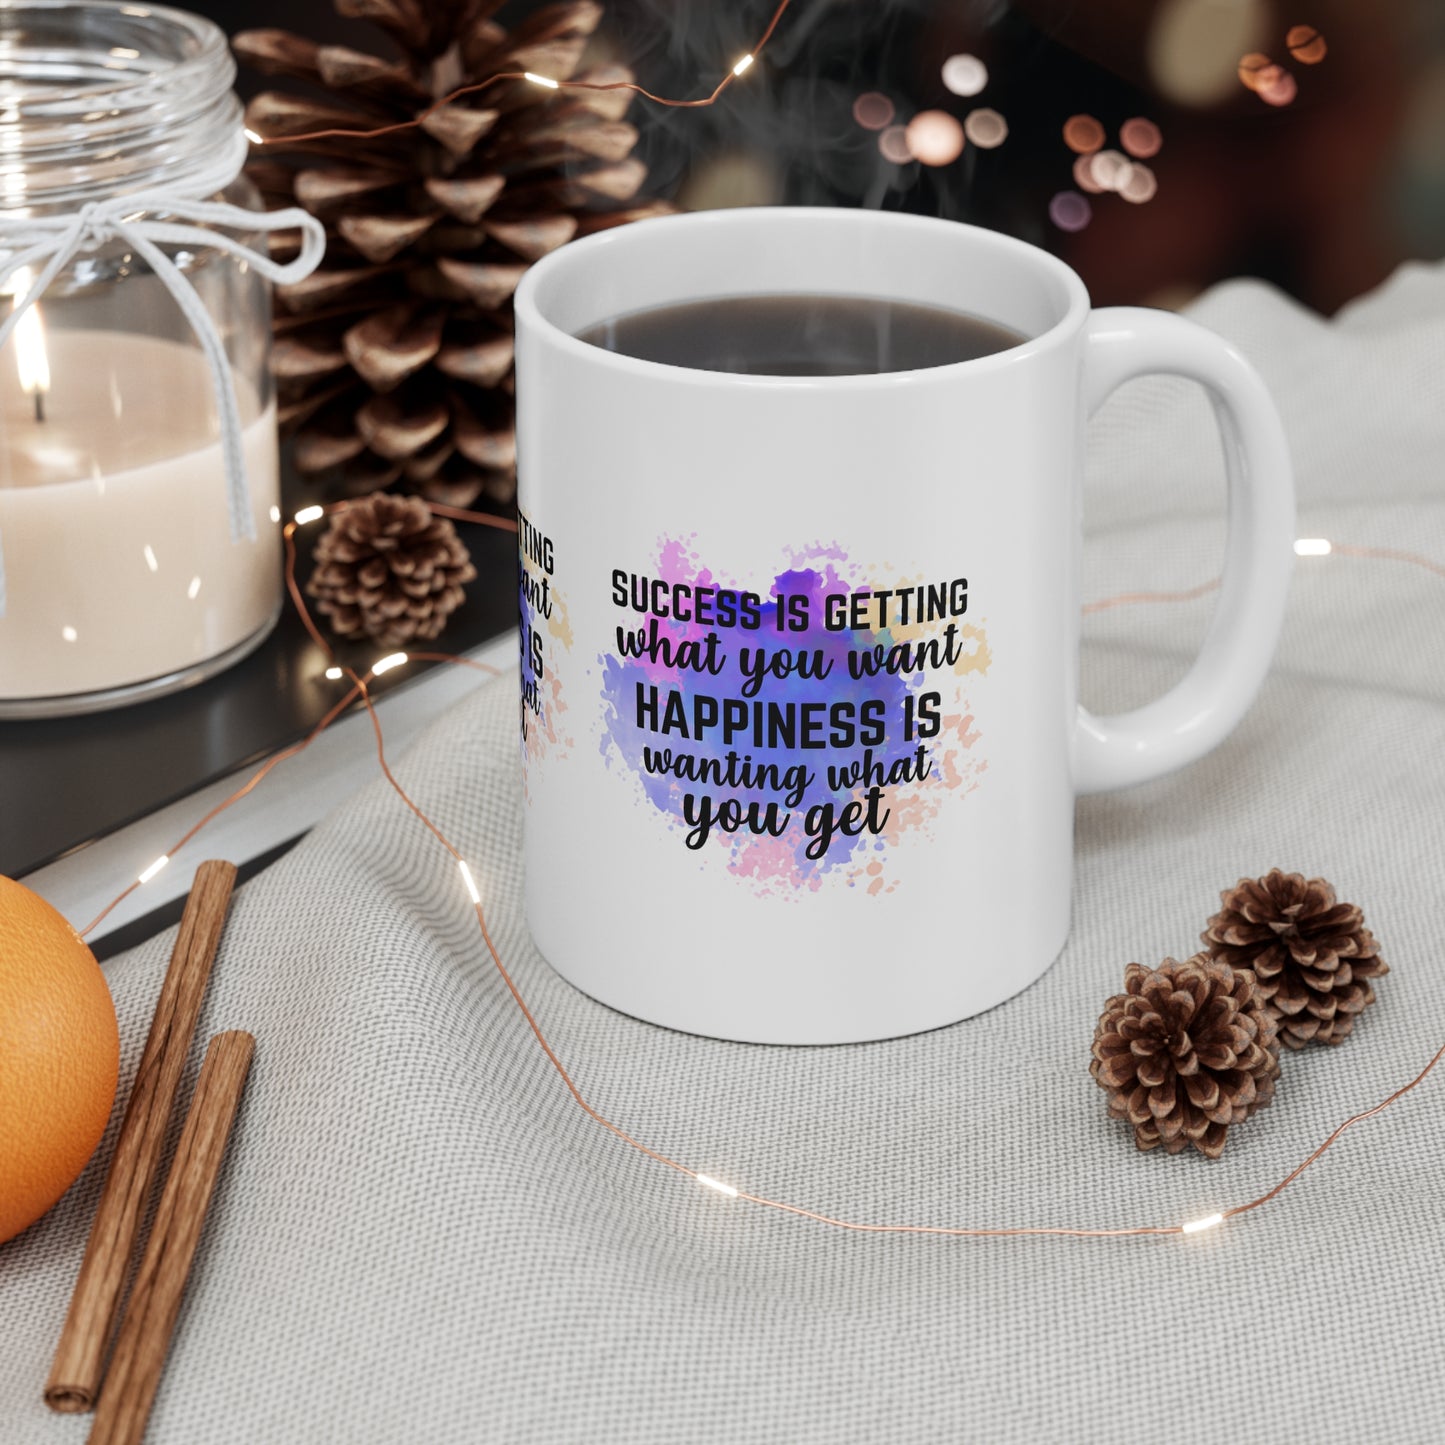 "SUCCESS is getting what you want. HAPINESS is wanting what you get" Mug - Mugscity23™️ Free Shipping!